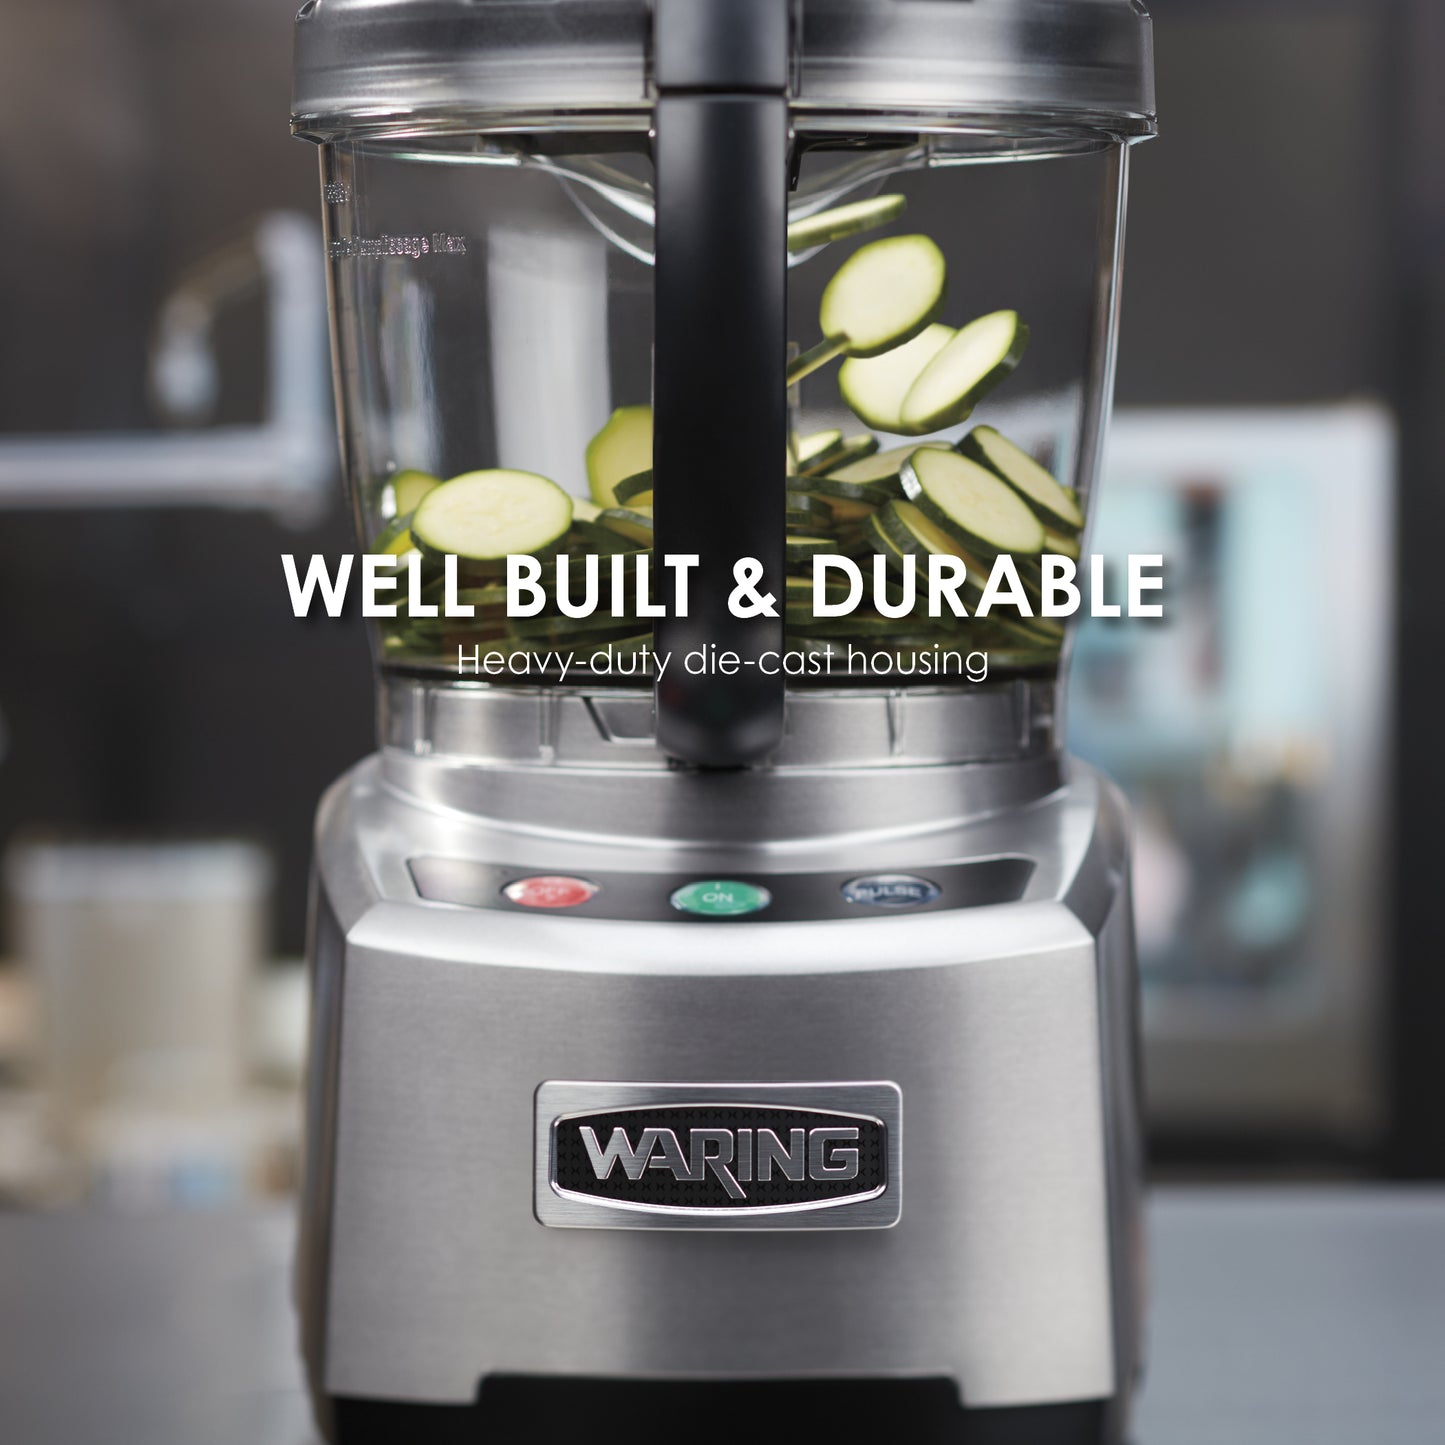 Waring WFP16S 4-Qt. Bowl Cutter Mixer with LiquiLock® Seal System